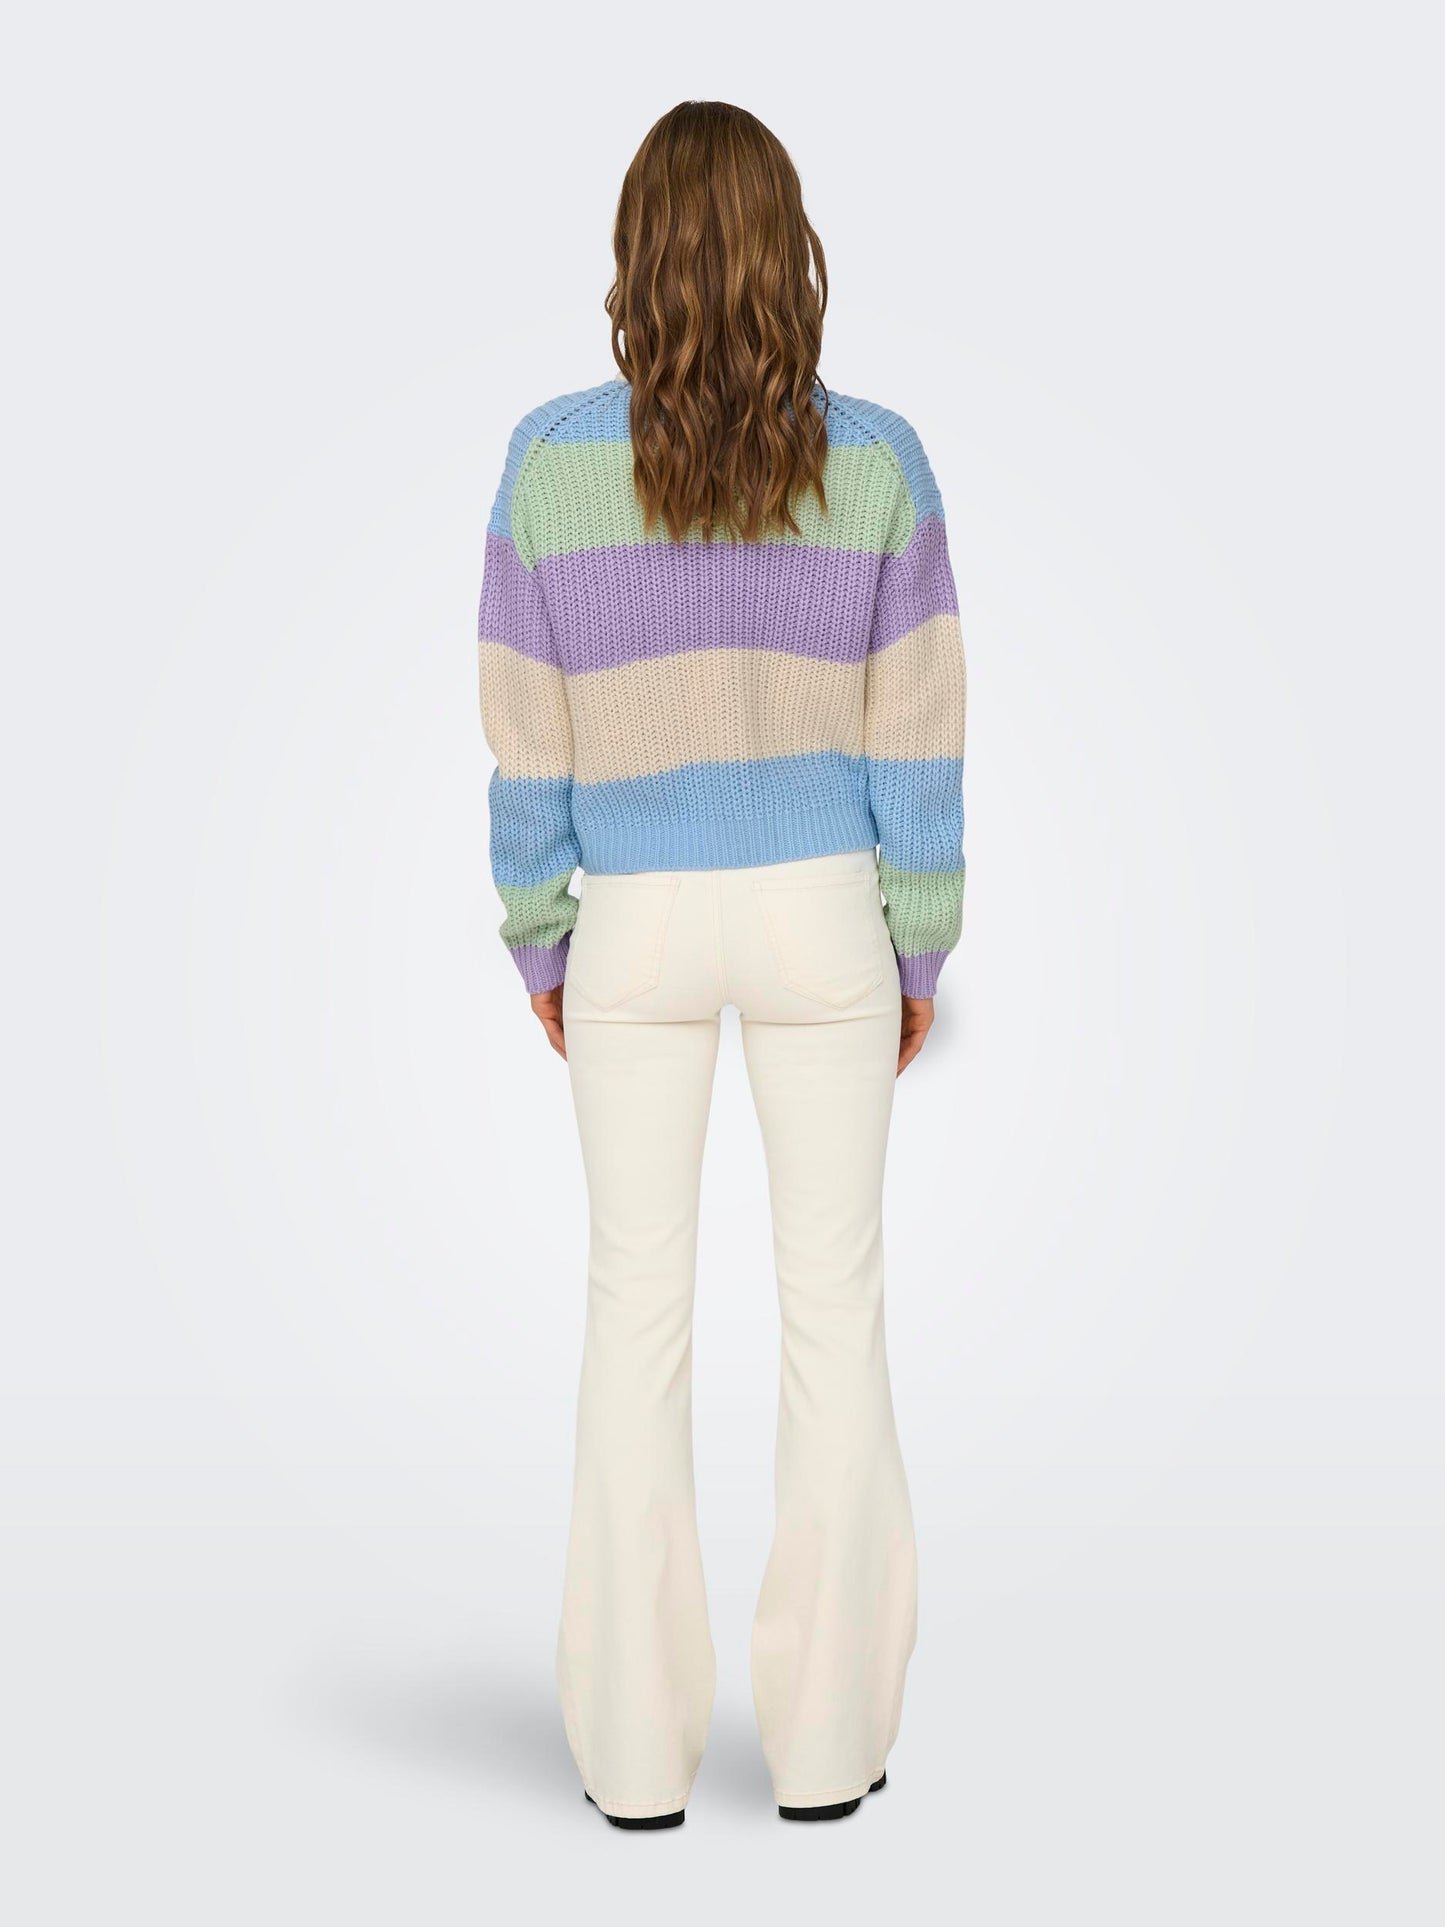 Only - Candy Pastel Stripe Knit Jumper in Blue & Lilac